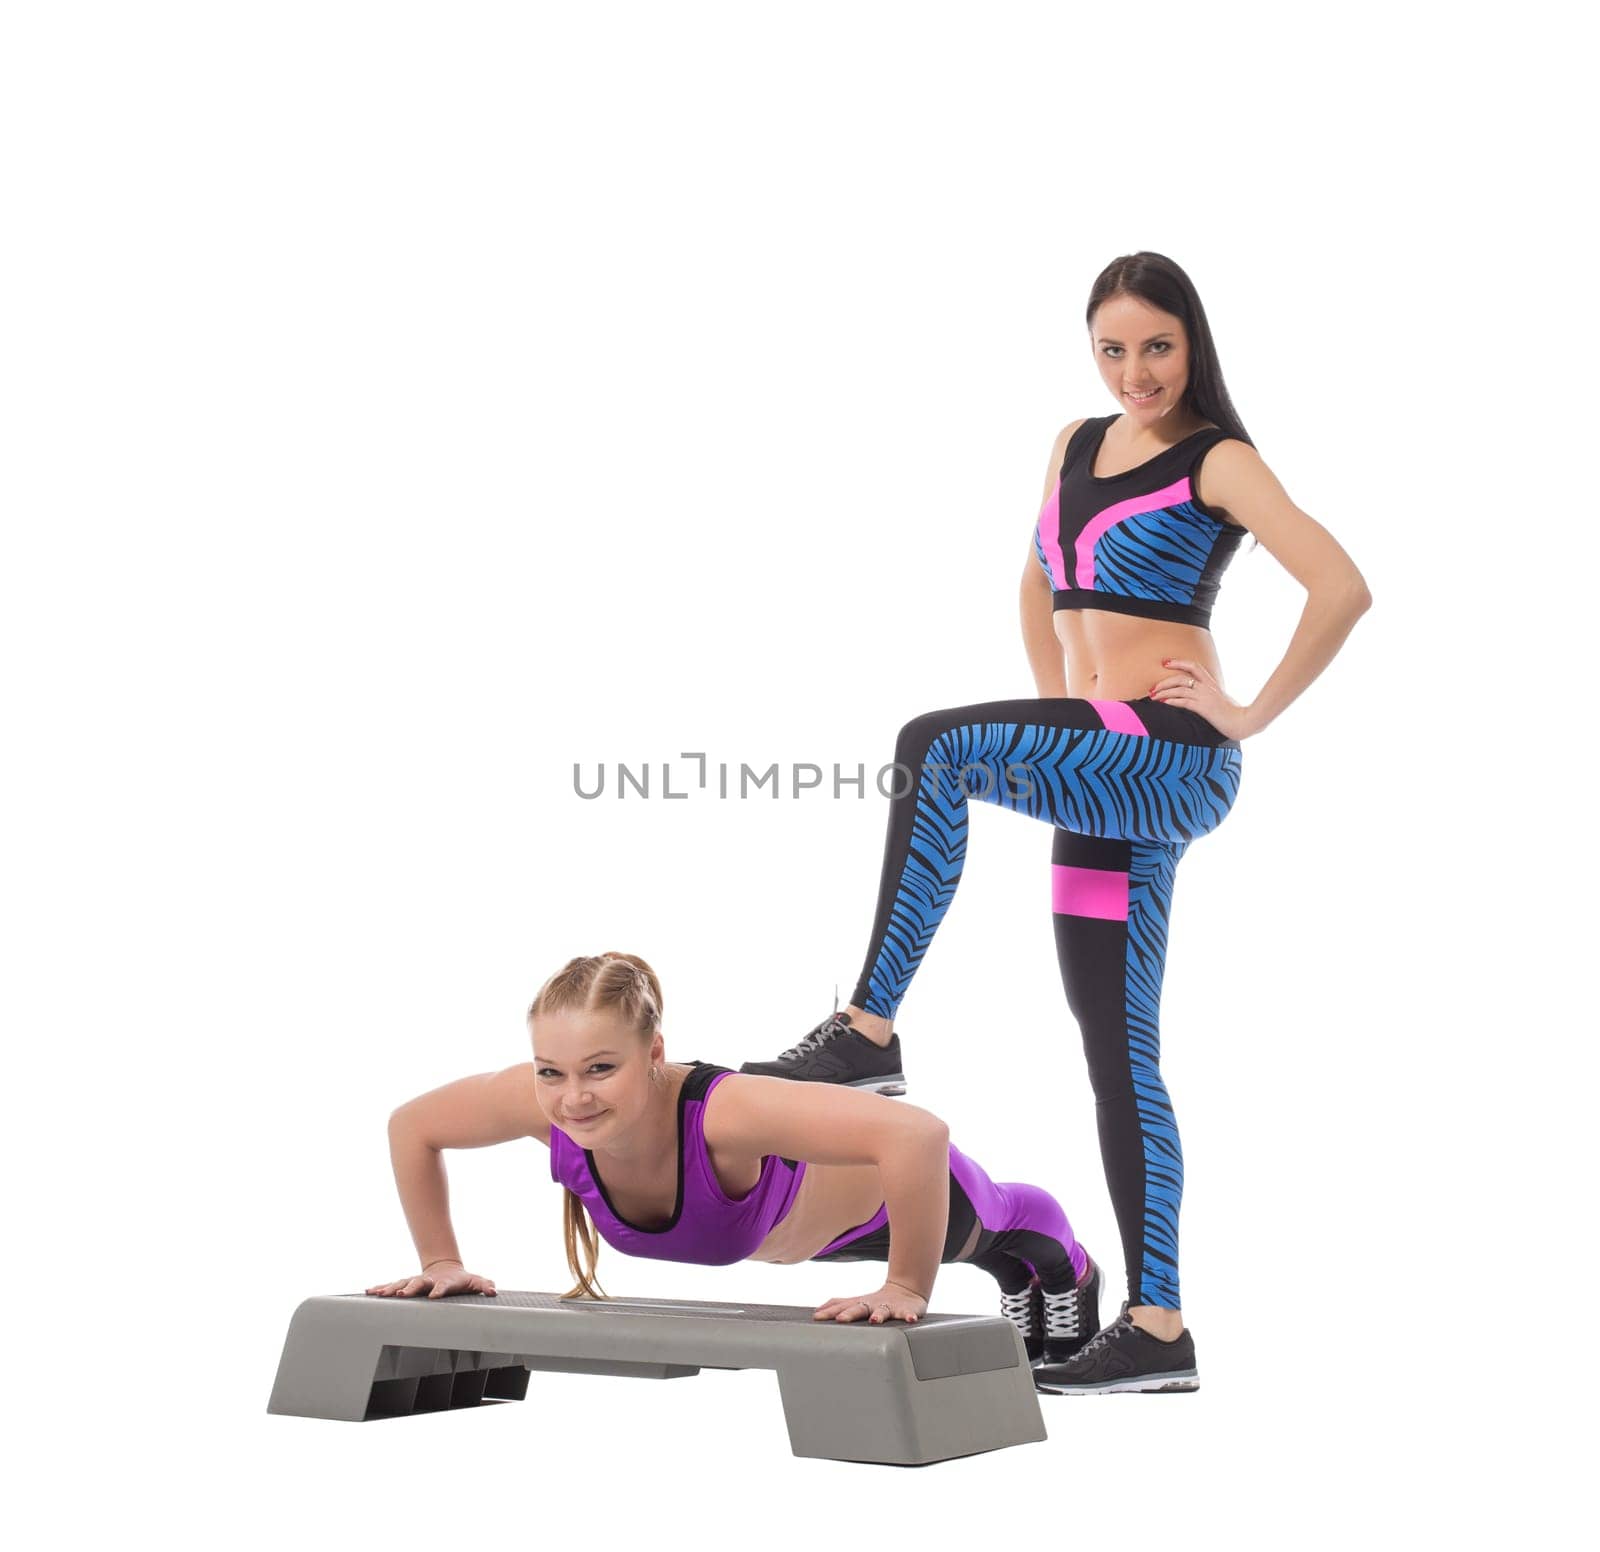 Cute sporty girl helping her partner to train, isolated on white